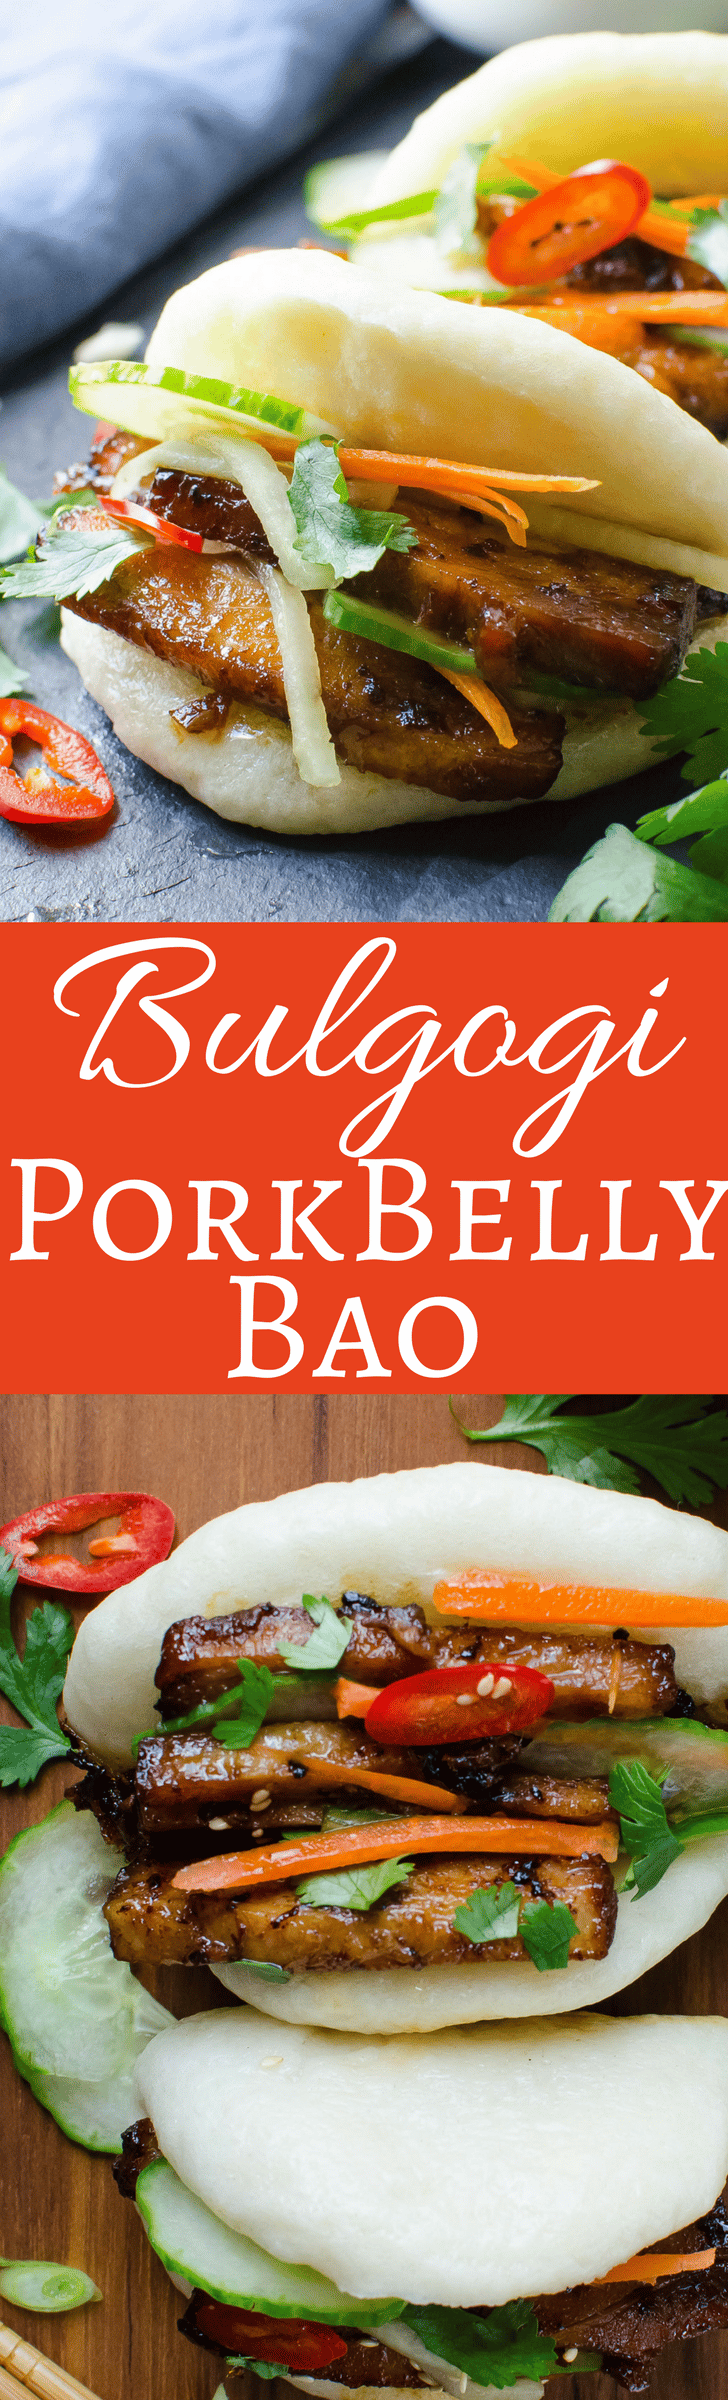 This easy recipe for Asian Steamed Pork Buns is a winner! Bulgogi Pork Belly Bao gets its flavor from a spicy, sweet savory marinade that will have you licking your fingers and going back for more!